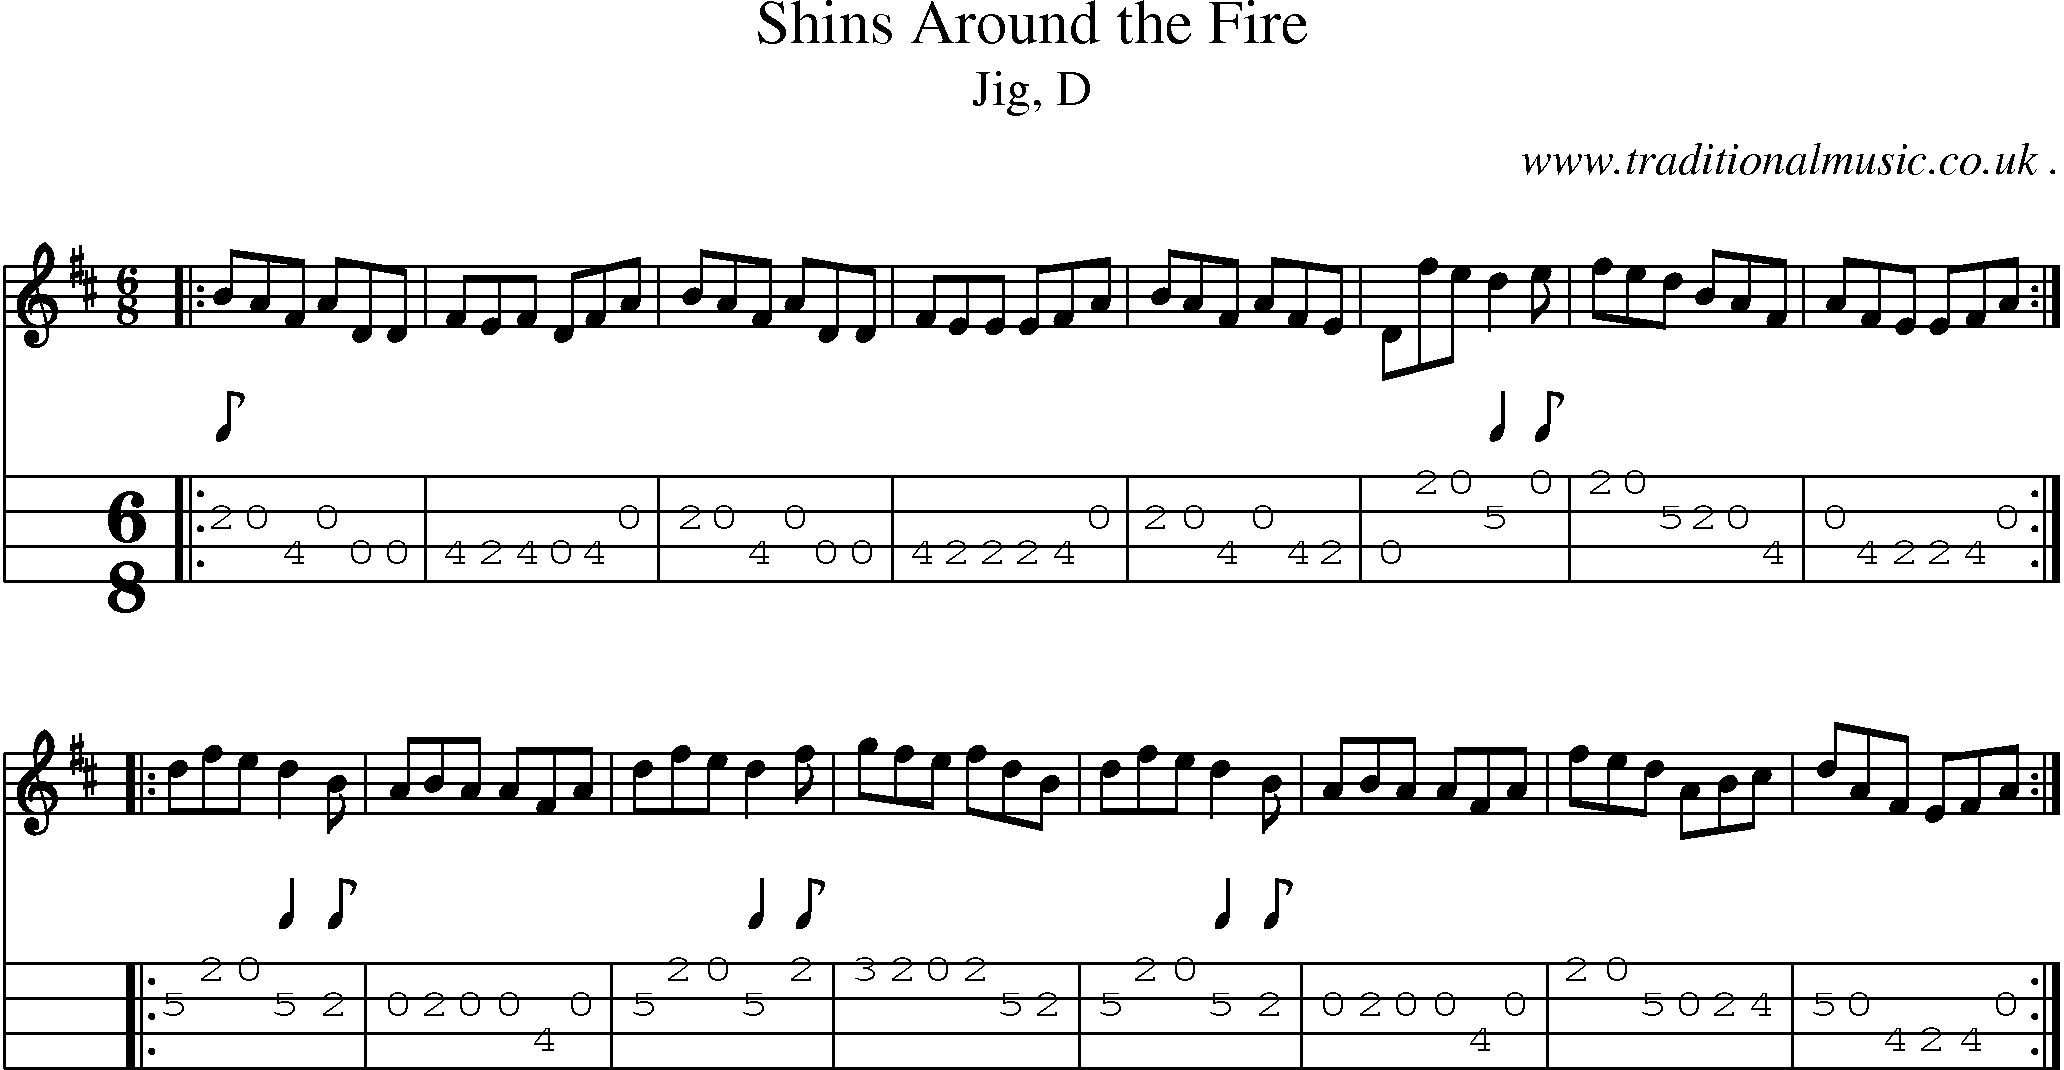 Sheet-music  score, Chords and Mandolin Tabs for Shins Around The Fire